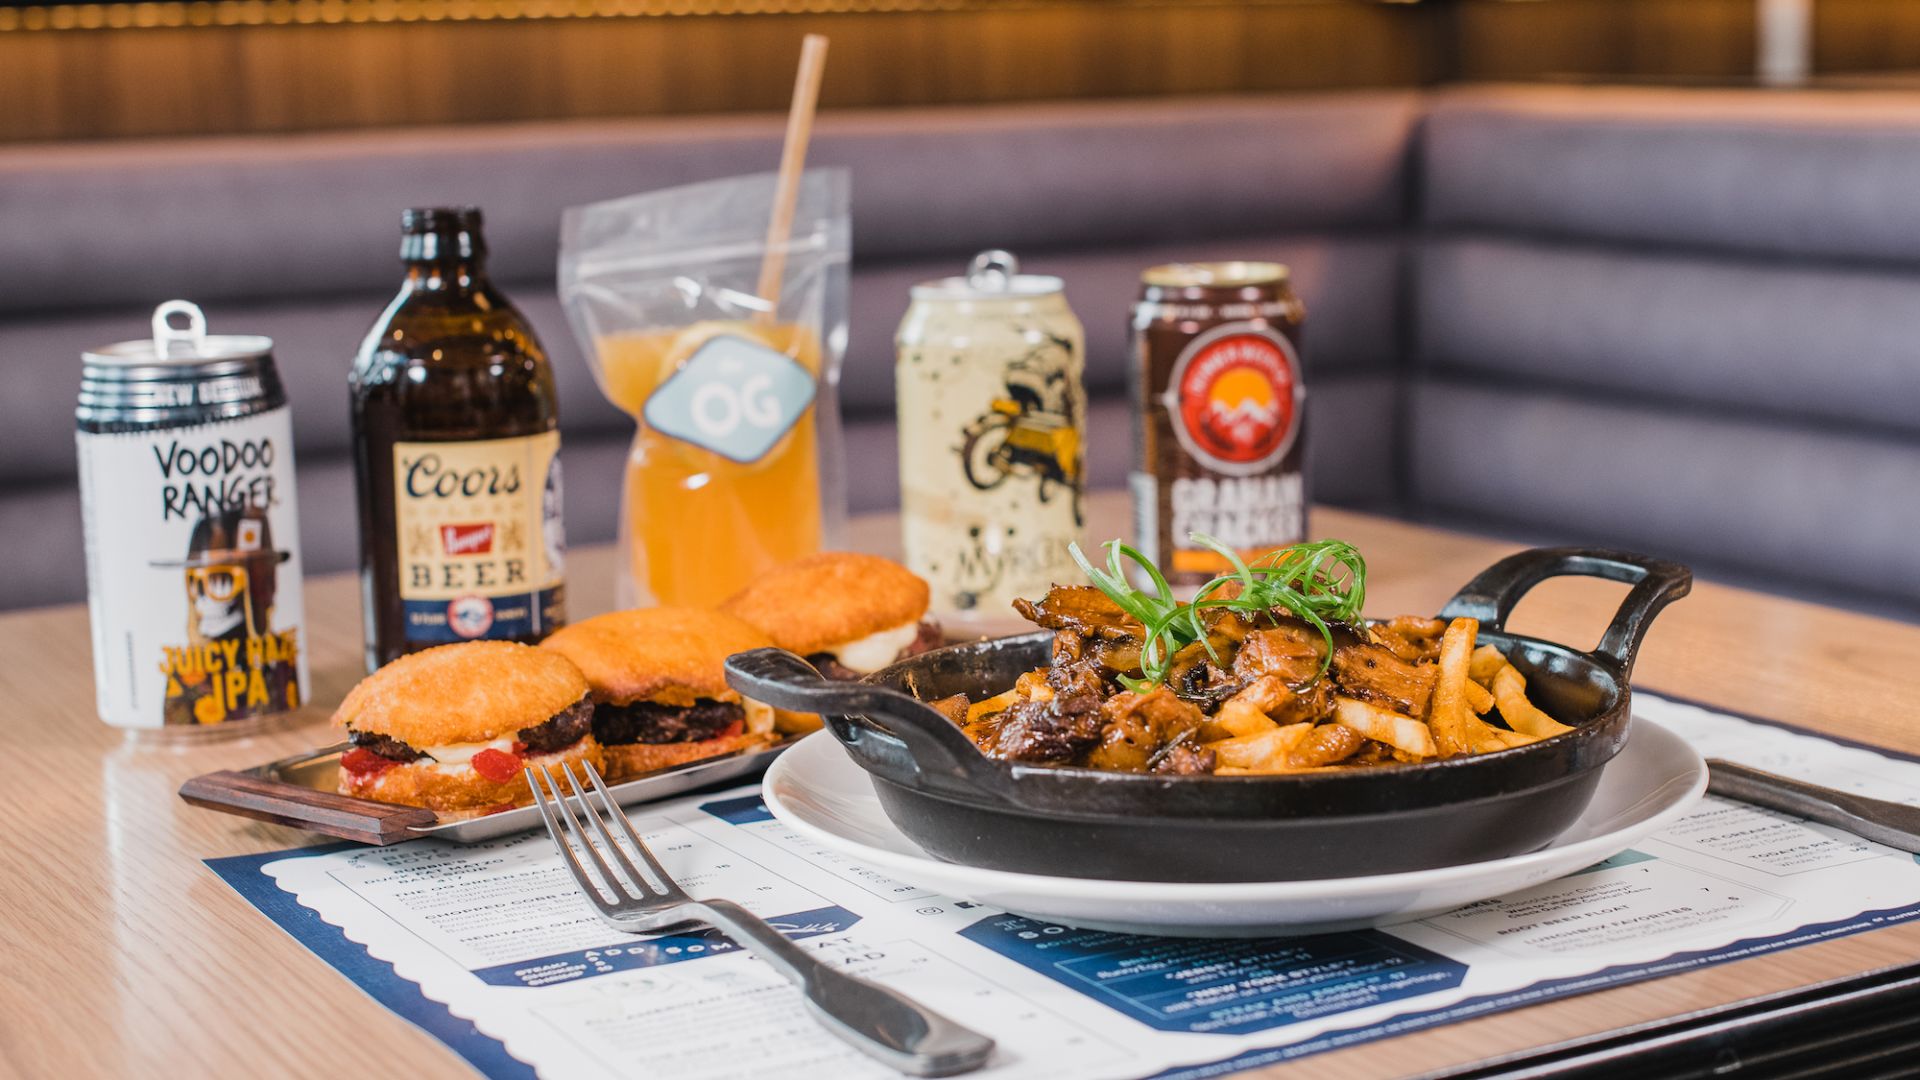 A Plate Of Poutine, Croughnut Sliders and Beverage Options On A Table